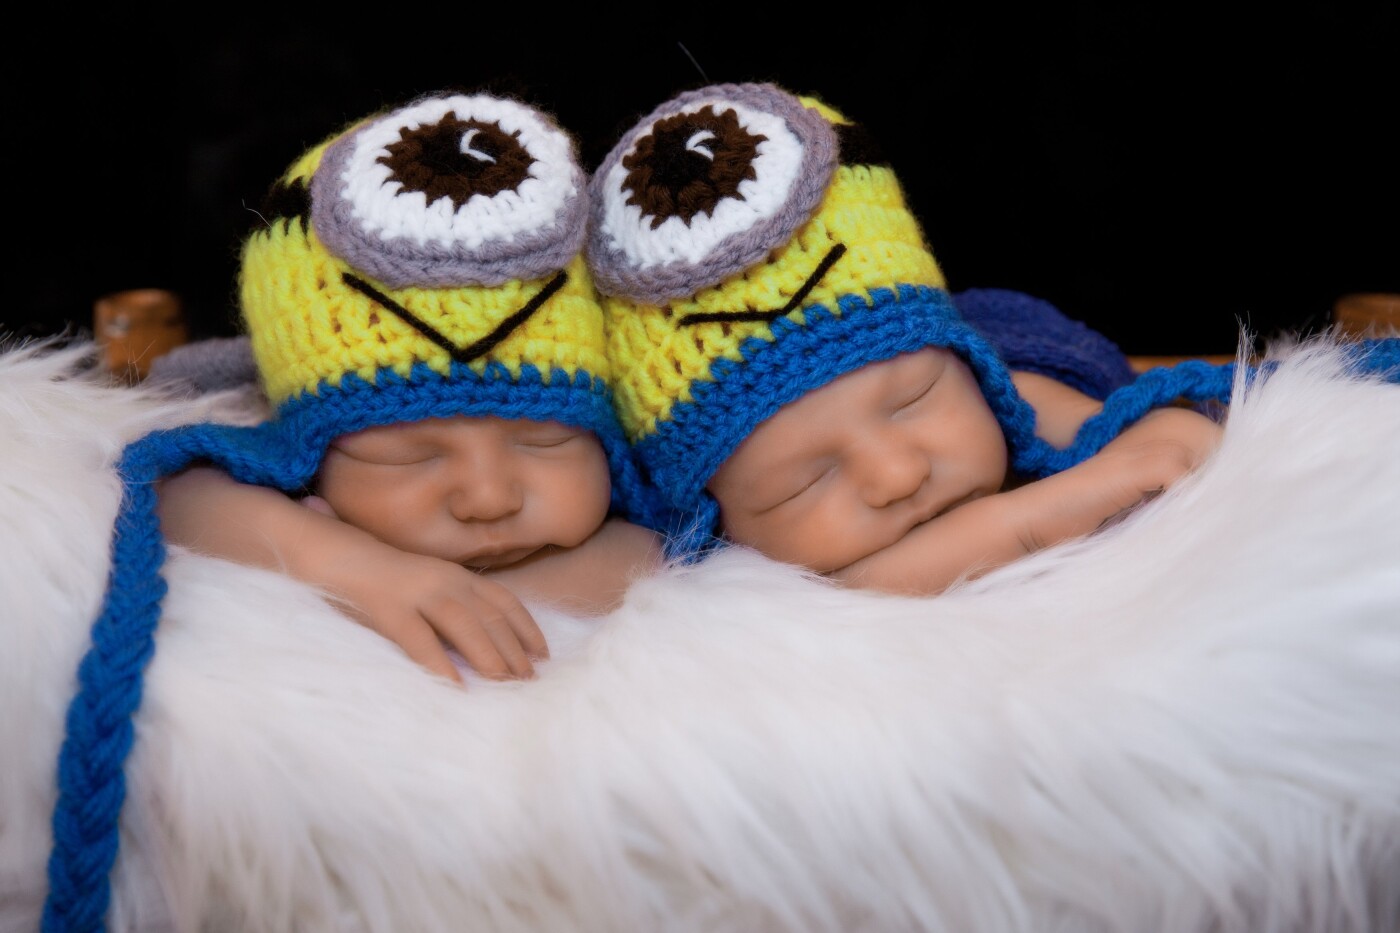 Two sweet minions. <br />
<br />
Captured in the comfort of the client's home via my all inclusive mobile studio service. ($399 includes 2-2.5 hours shooting time, all 300 images on disc plus 20 detailed edits. )<br />
See www.cranstonphoto.com for more. 